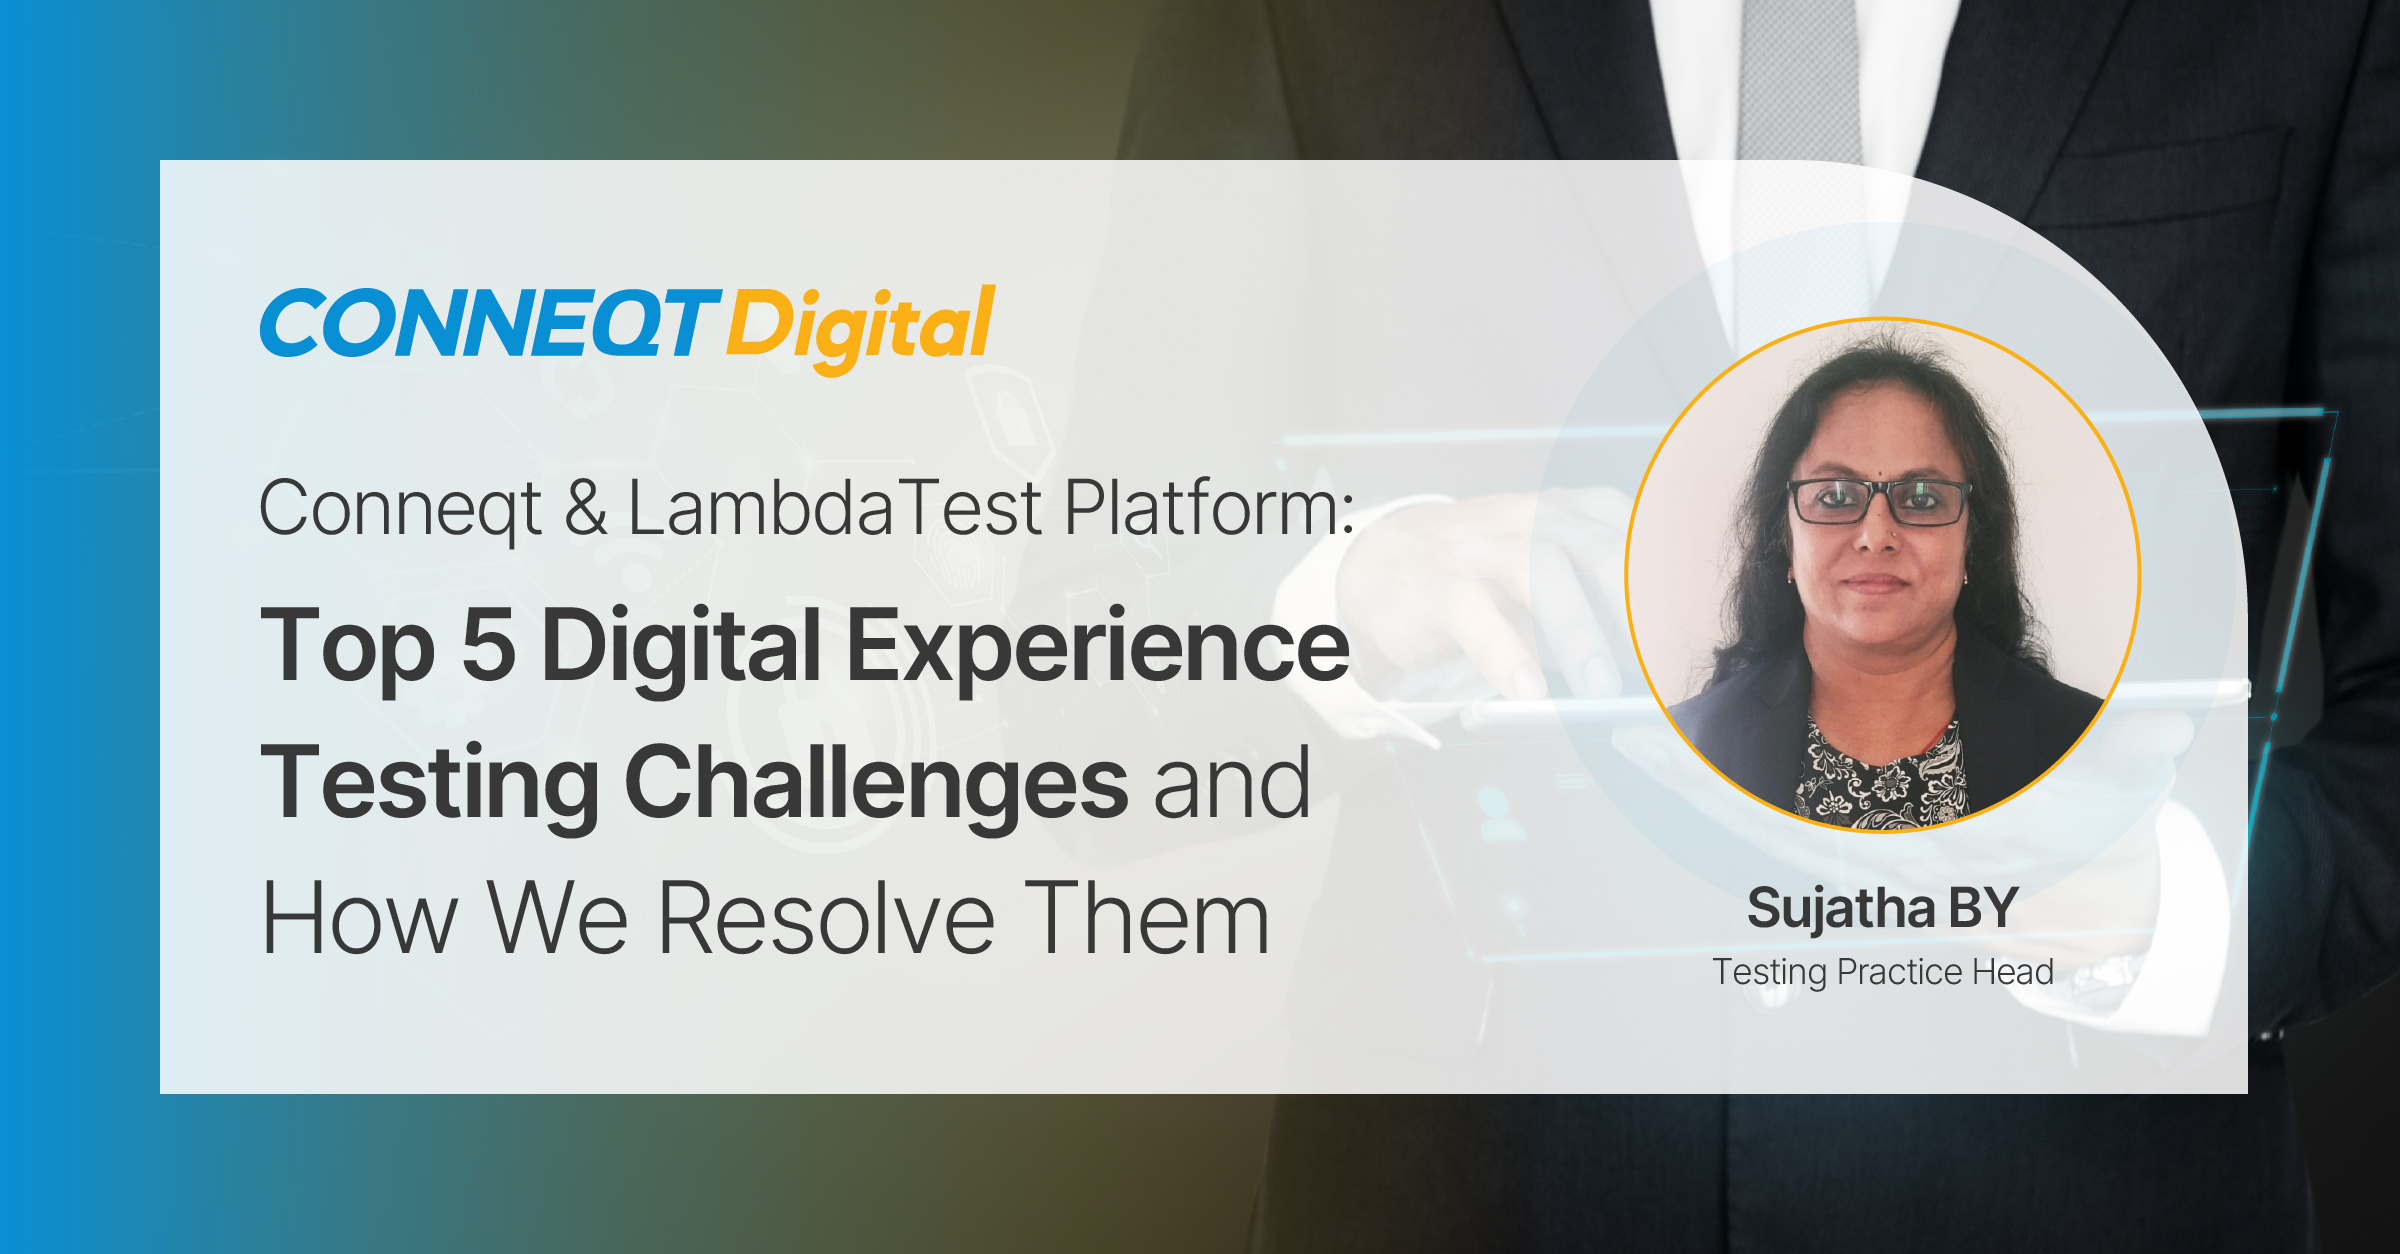 Top 5 Digital Experience Testing Challenges and How We Resolve Them